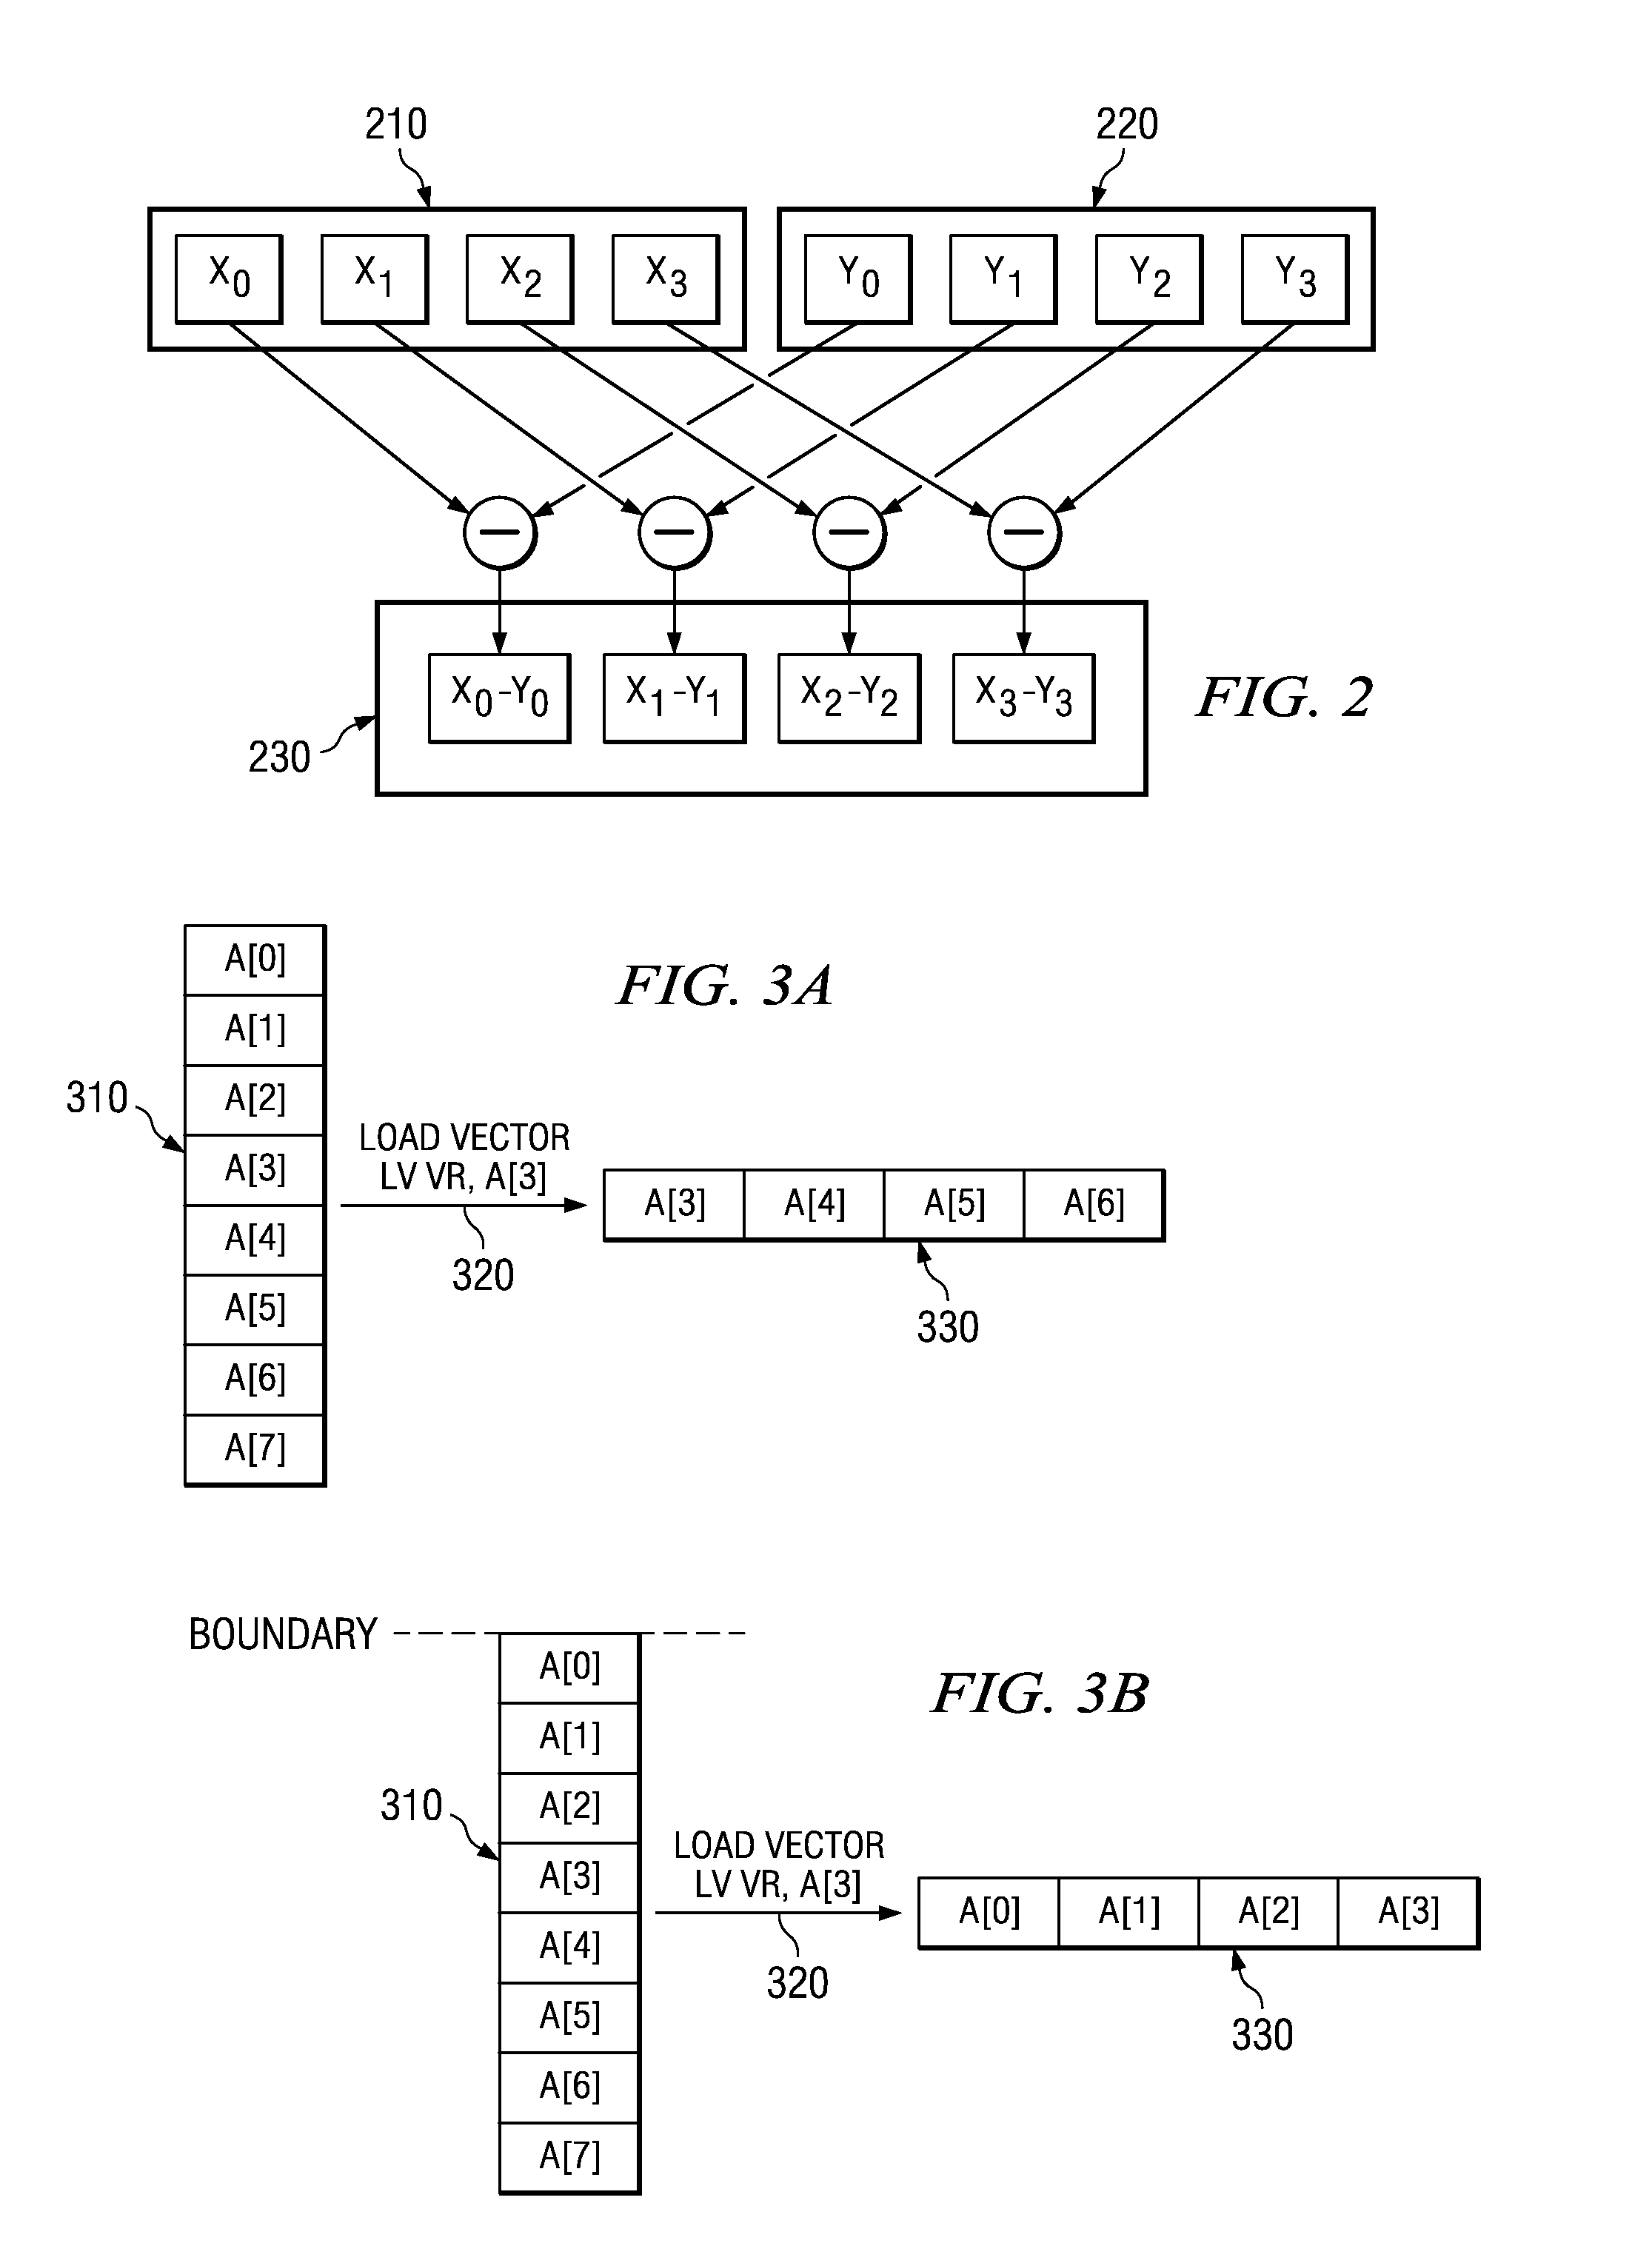 System and Method for Compiling Scalar Code for a Single Instruction Multiple Data (SIMD) Execution Engine